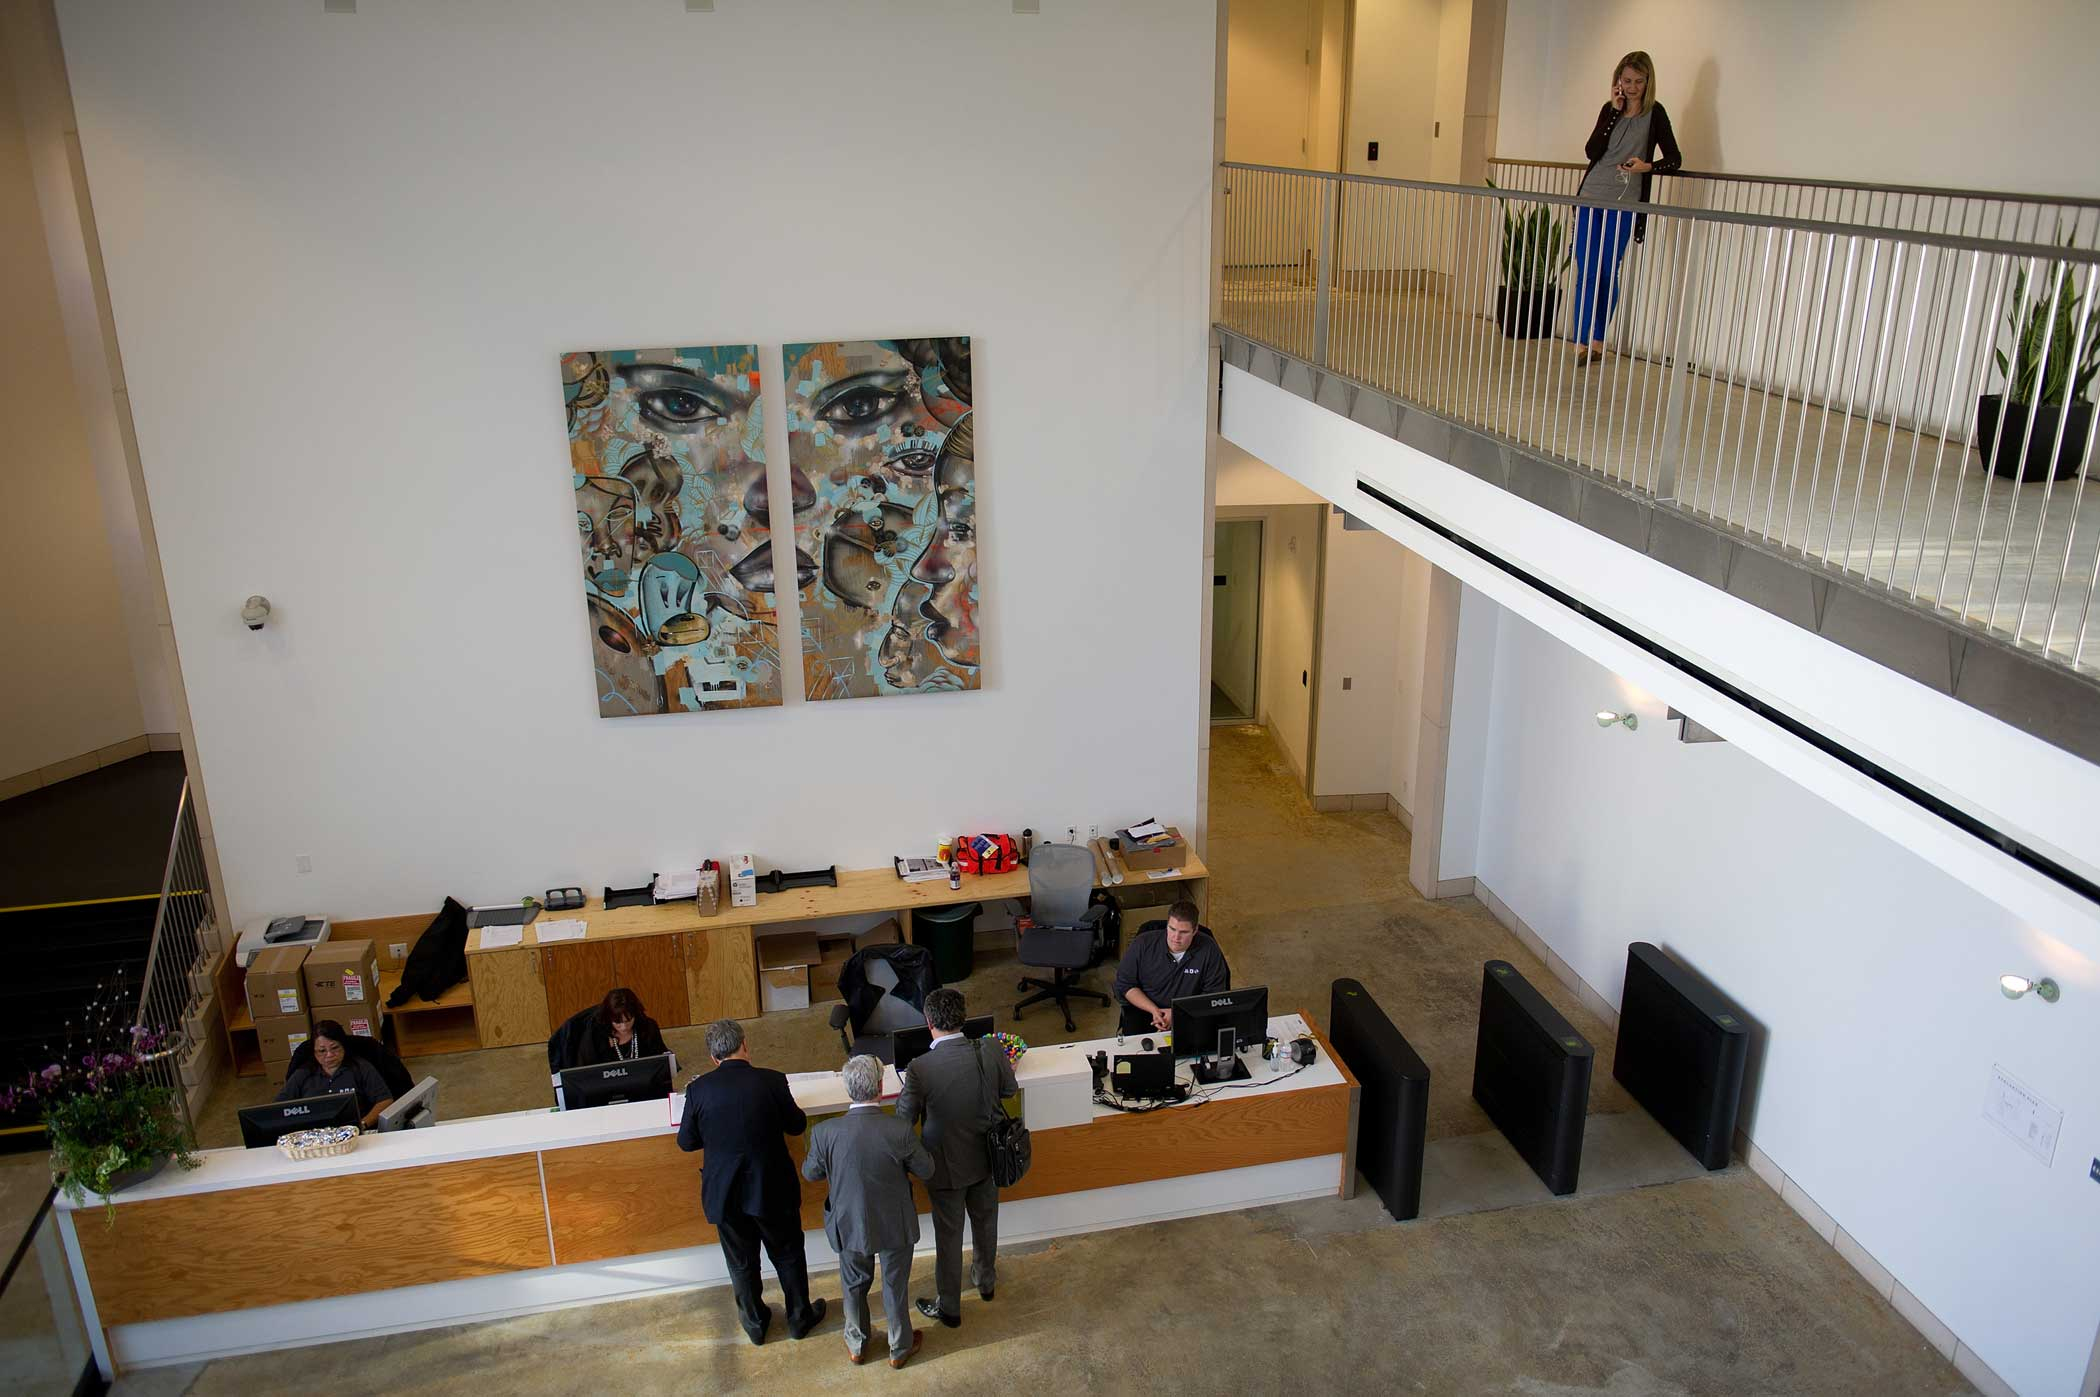 The desk is staffed inside the lobby area of the old Facebook Inc. campus in Menlo Park, California, U.S., on Dec. 2, 2011.